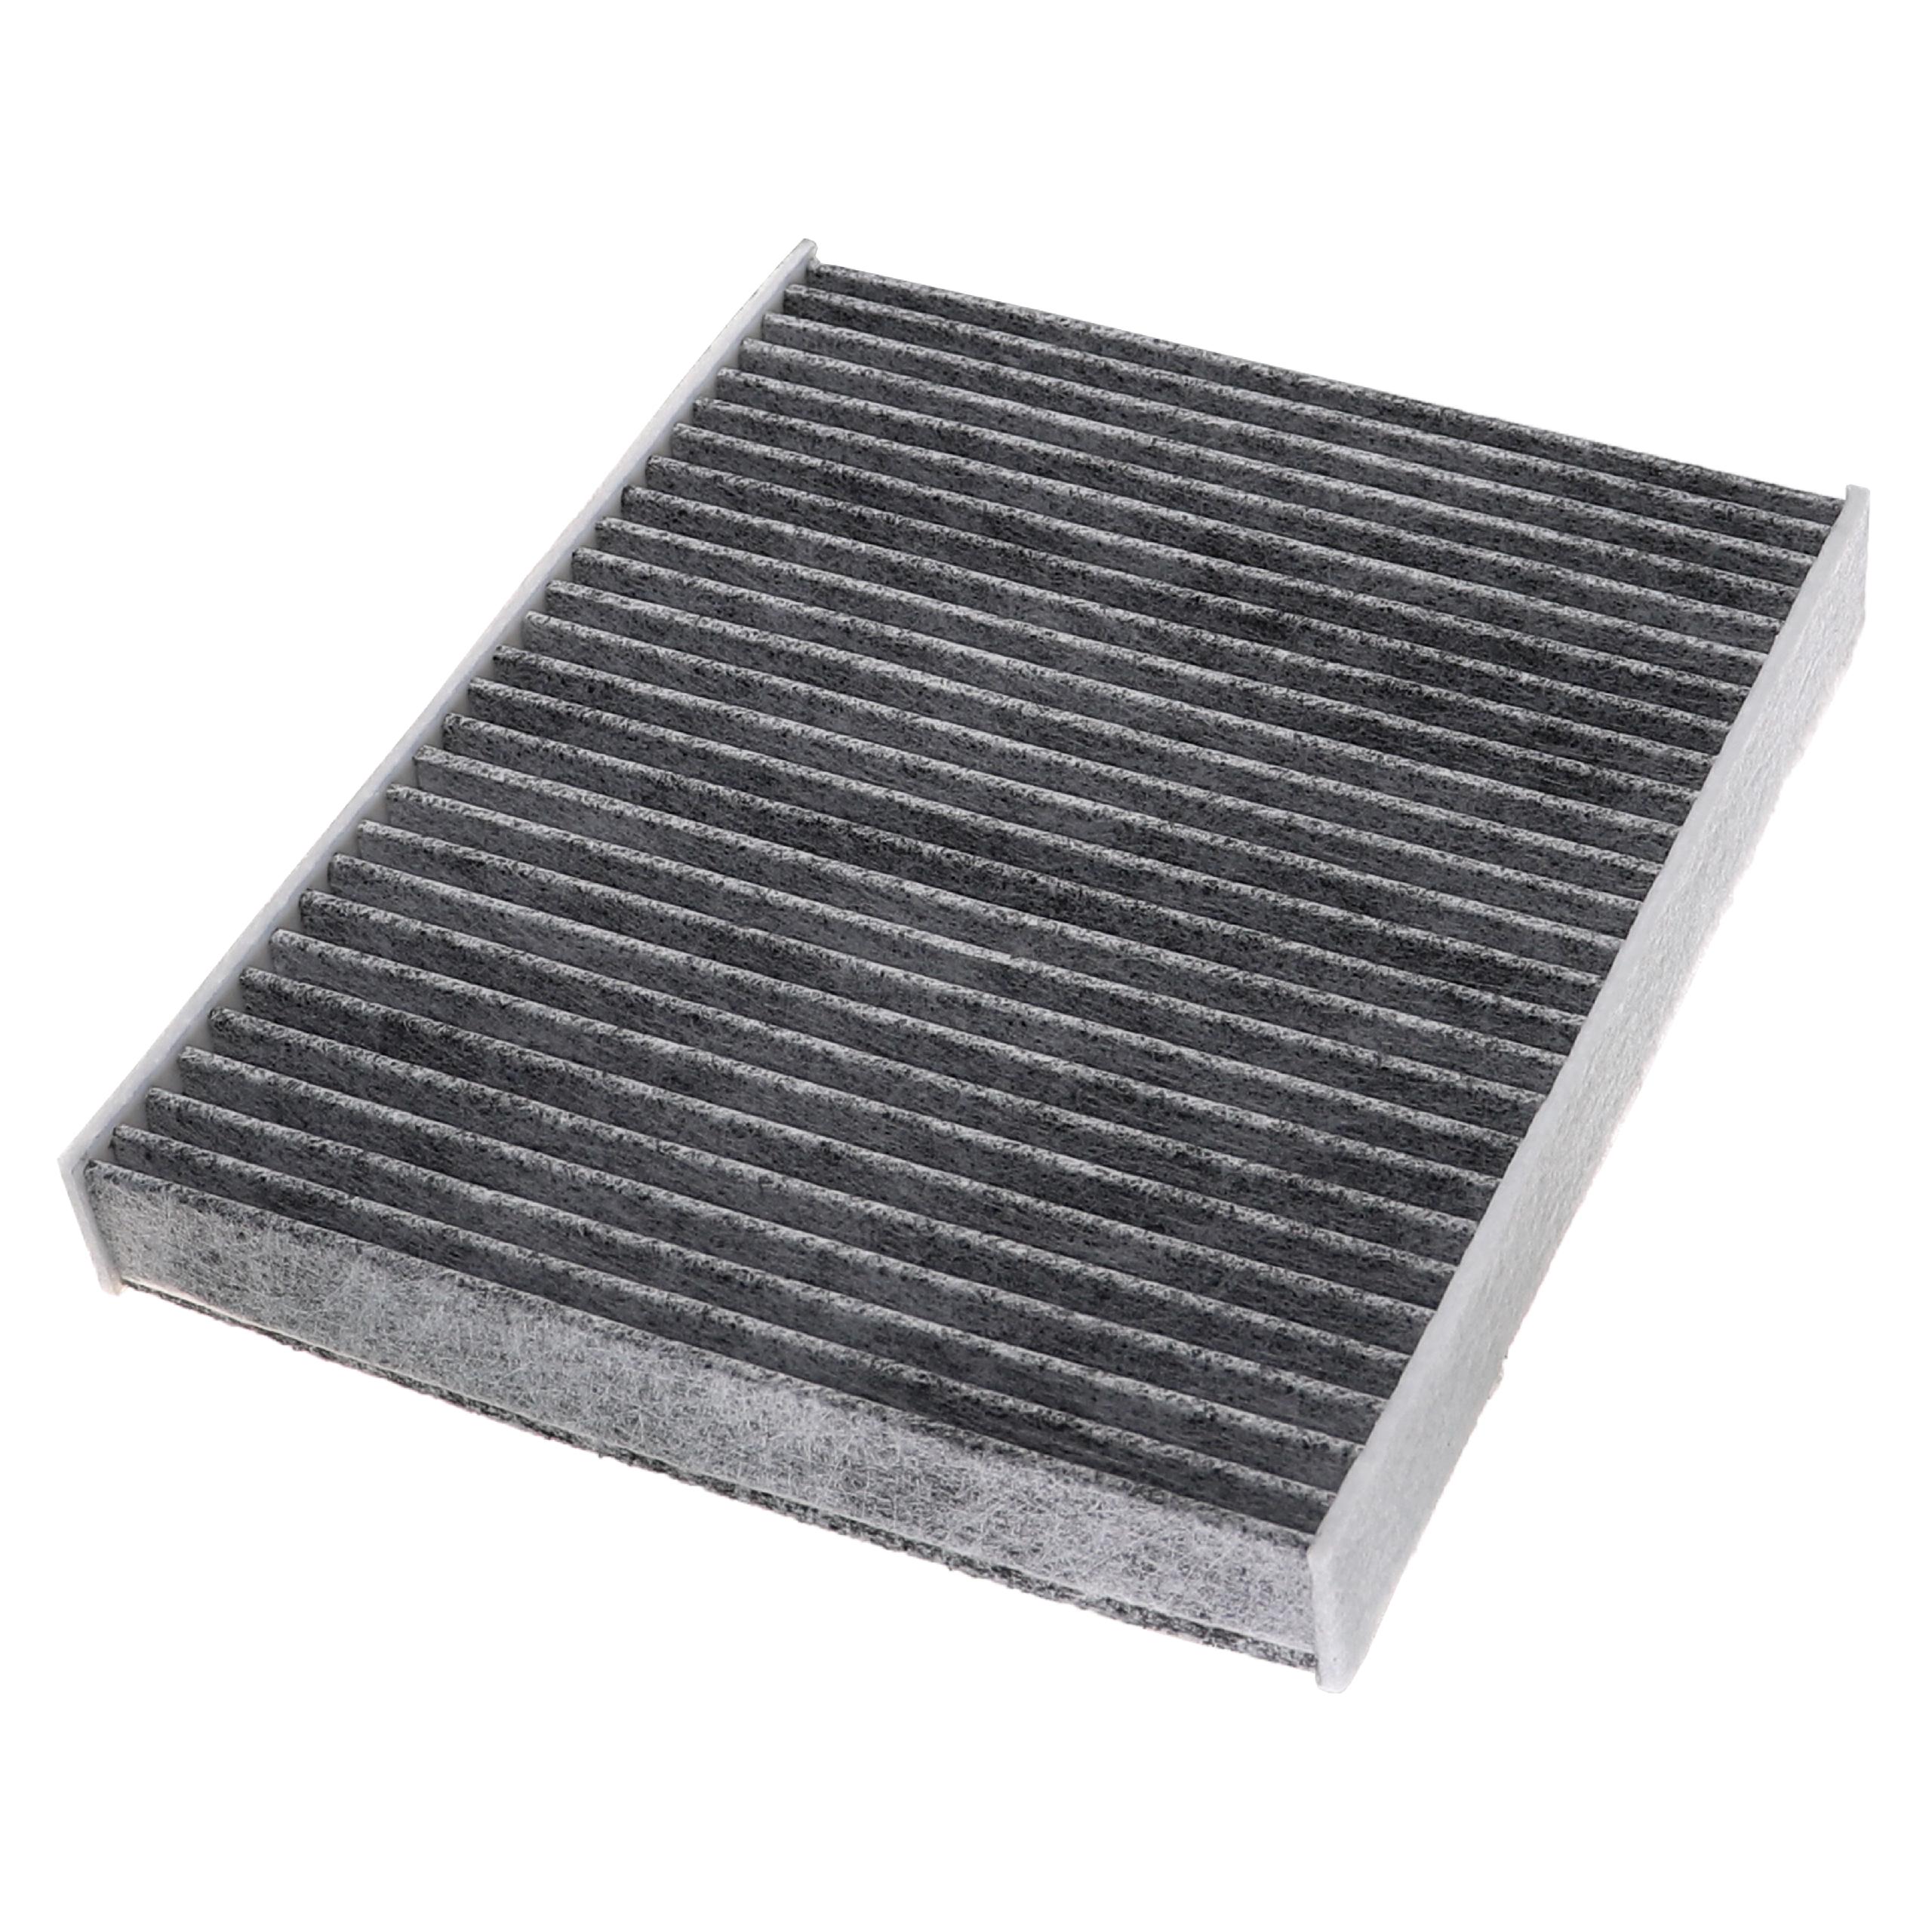 2x Cabin Air Filter replaces 1A First Automotive K30410-2 etc.